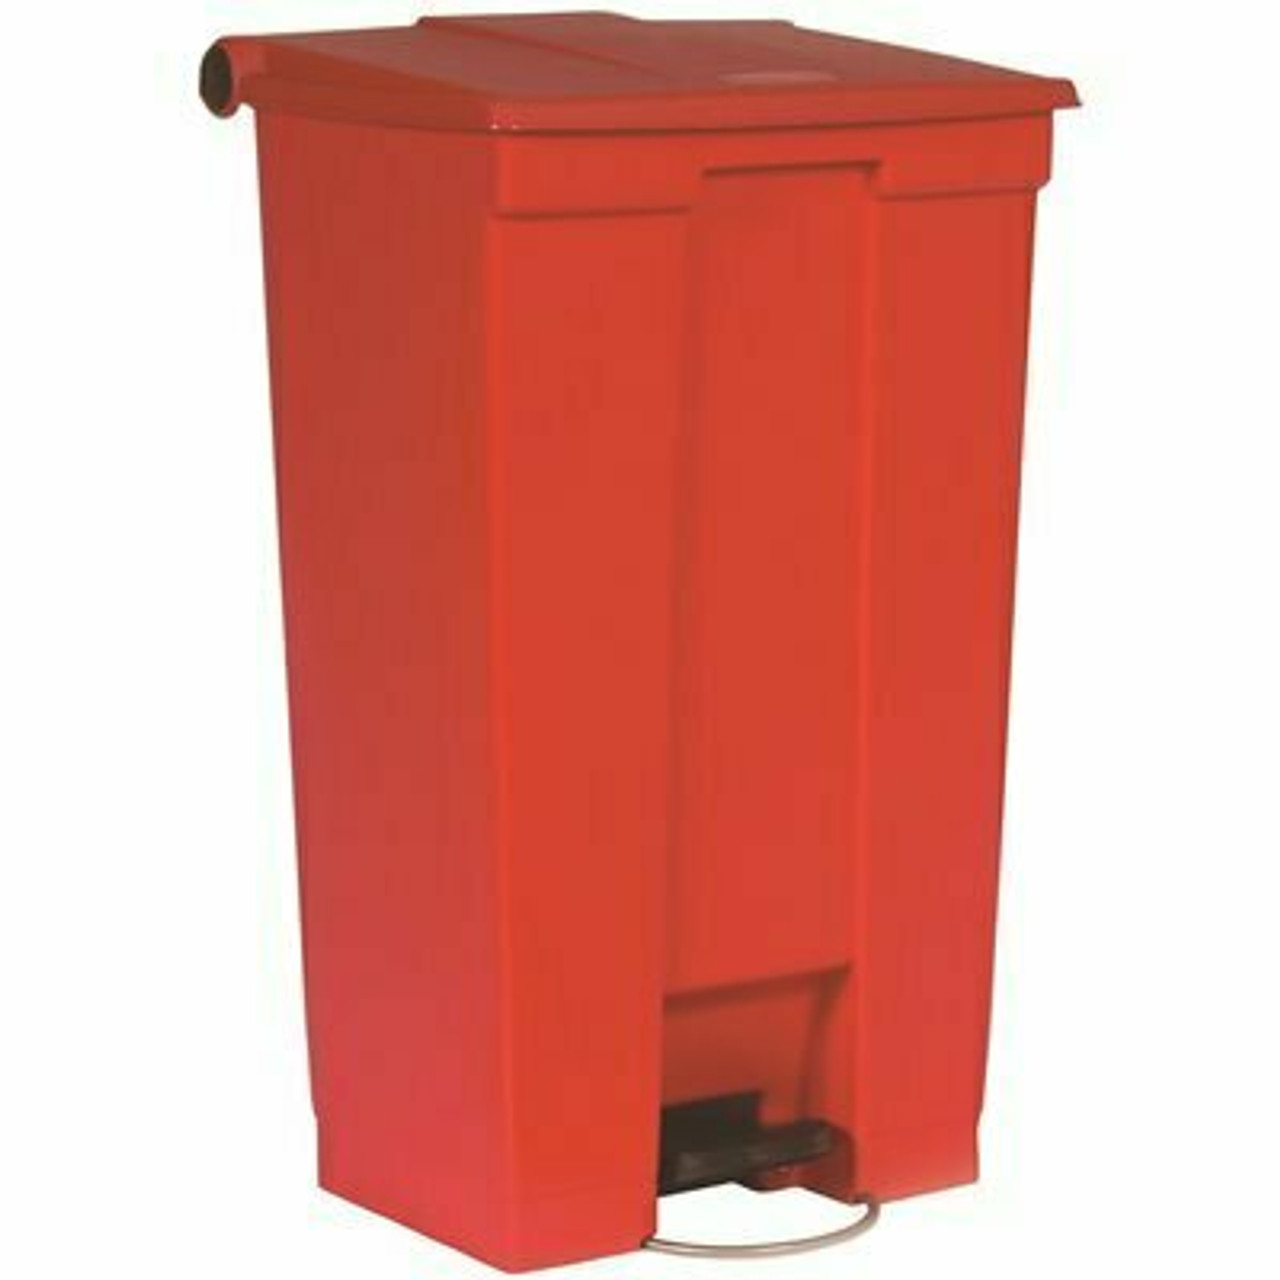 Rubbermaid Commercial Products 23 Gal. Step-On Red Trash Can